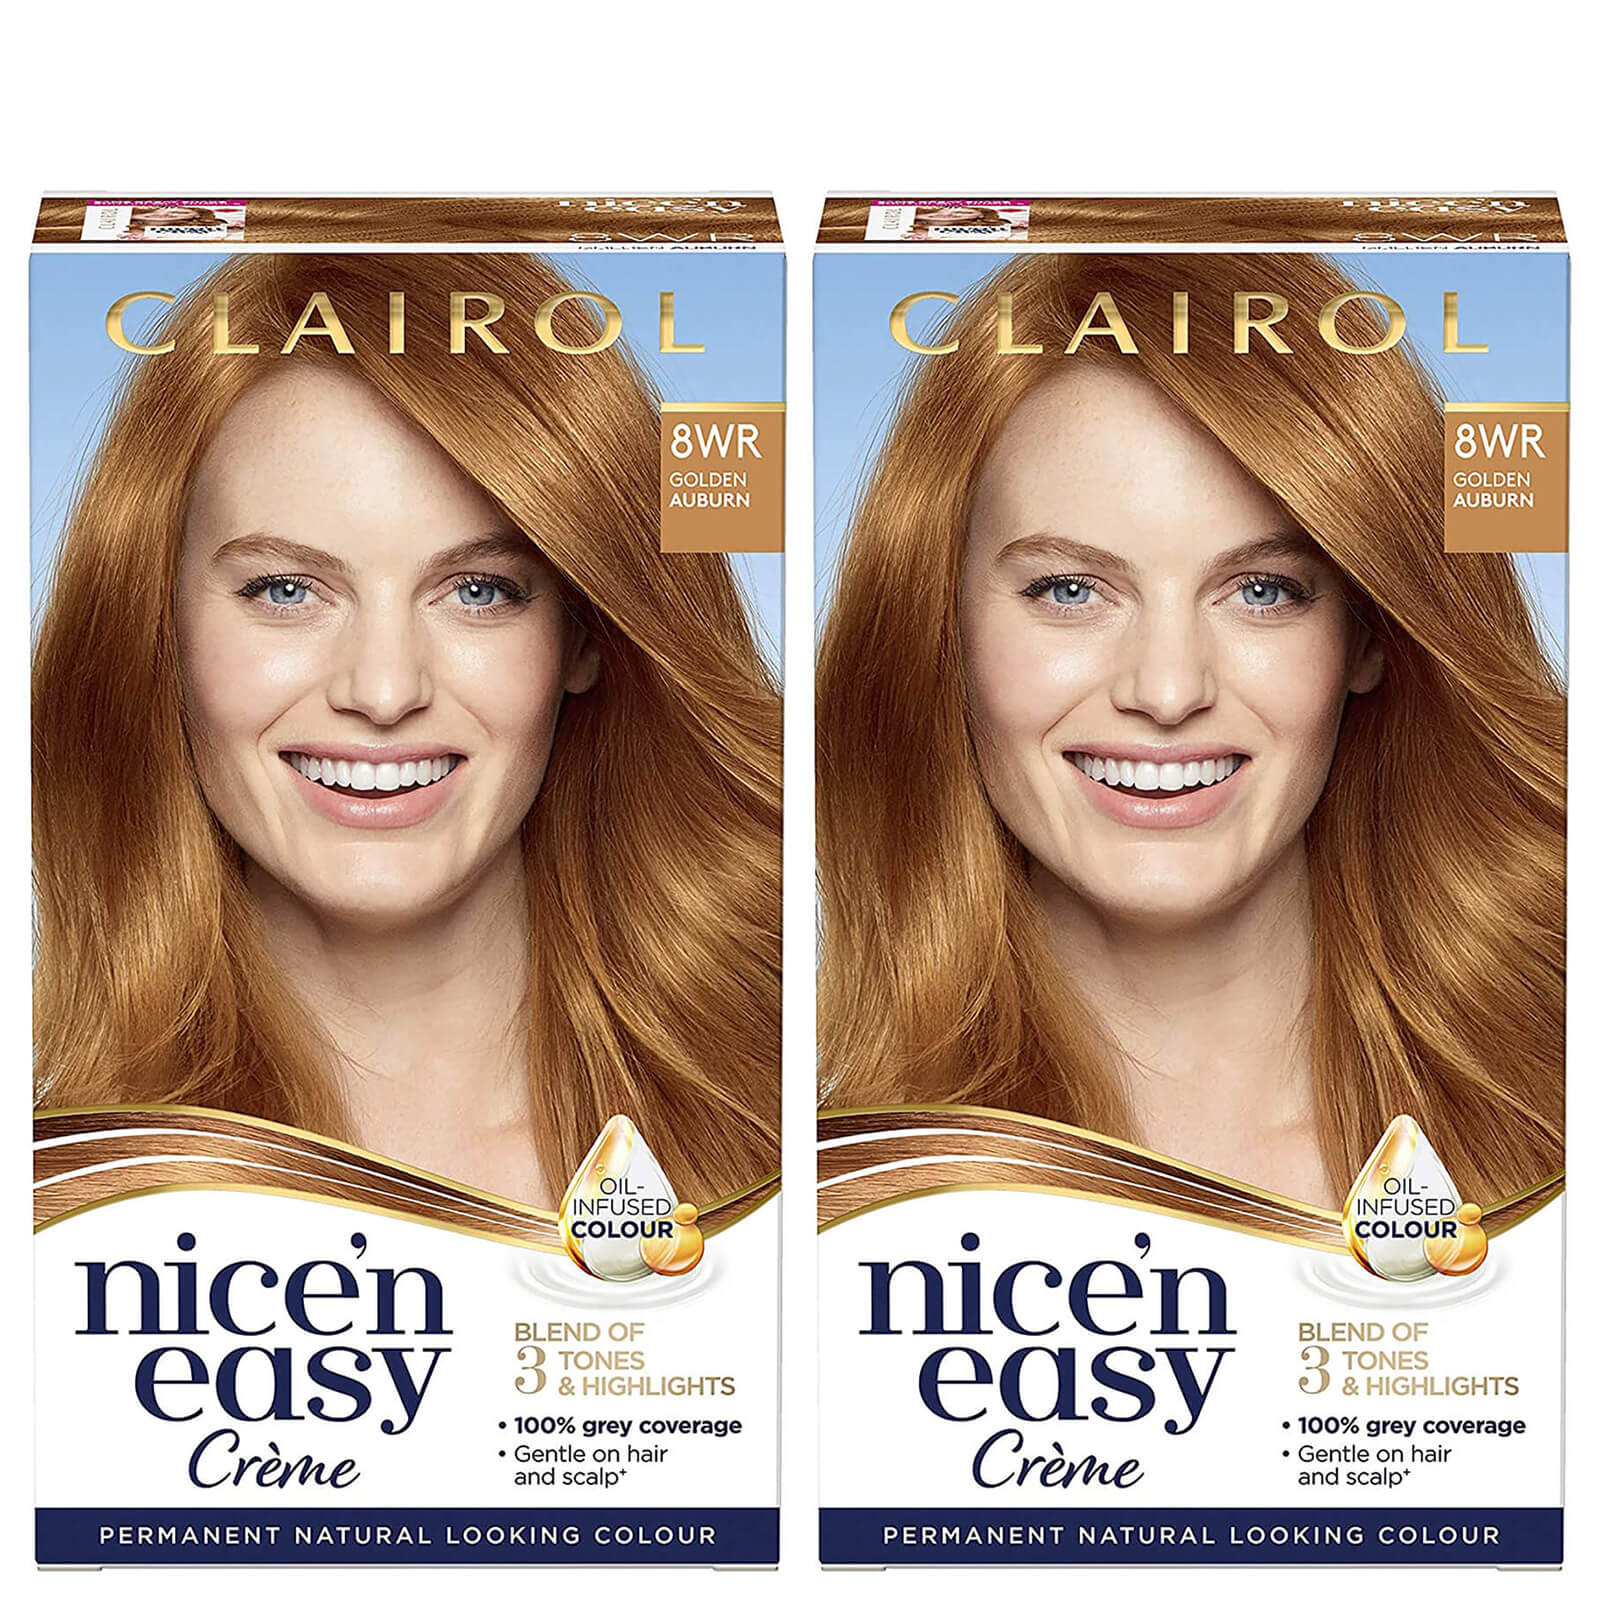 Clairol Nice' n Easy Crème Natural Looking Oil Infused Permanent Hair Dye Duo (Various Shades) - 8WR Golden Auburn